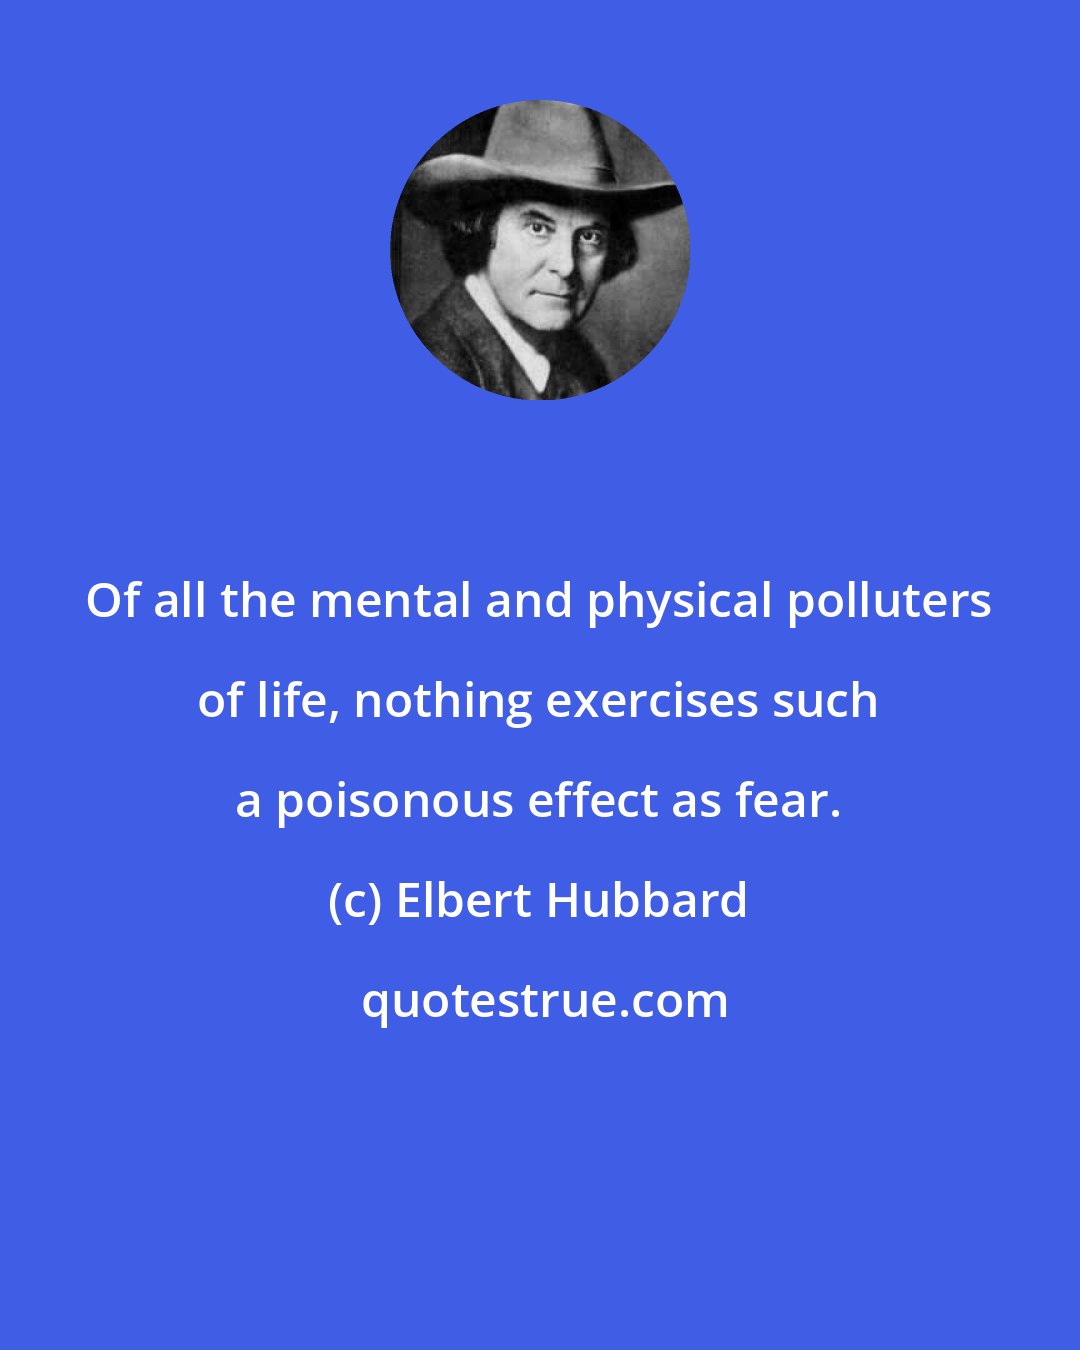 Elbert Hubbard: Of all the mental and physical polluters of life, nothing exercises such a poisonous effect as fear.